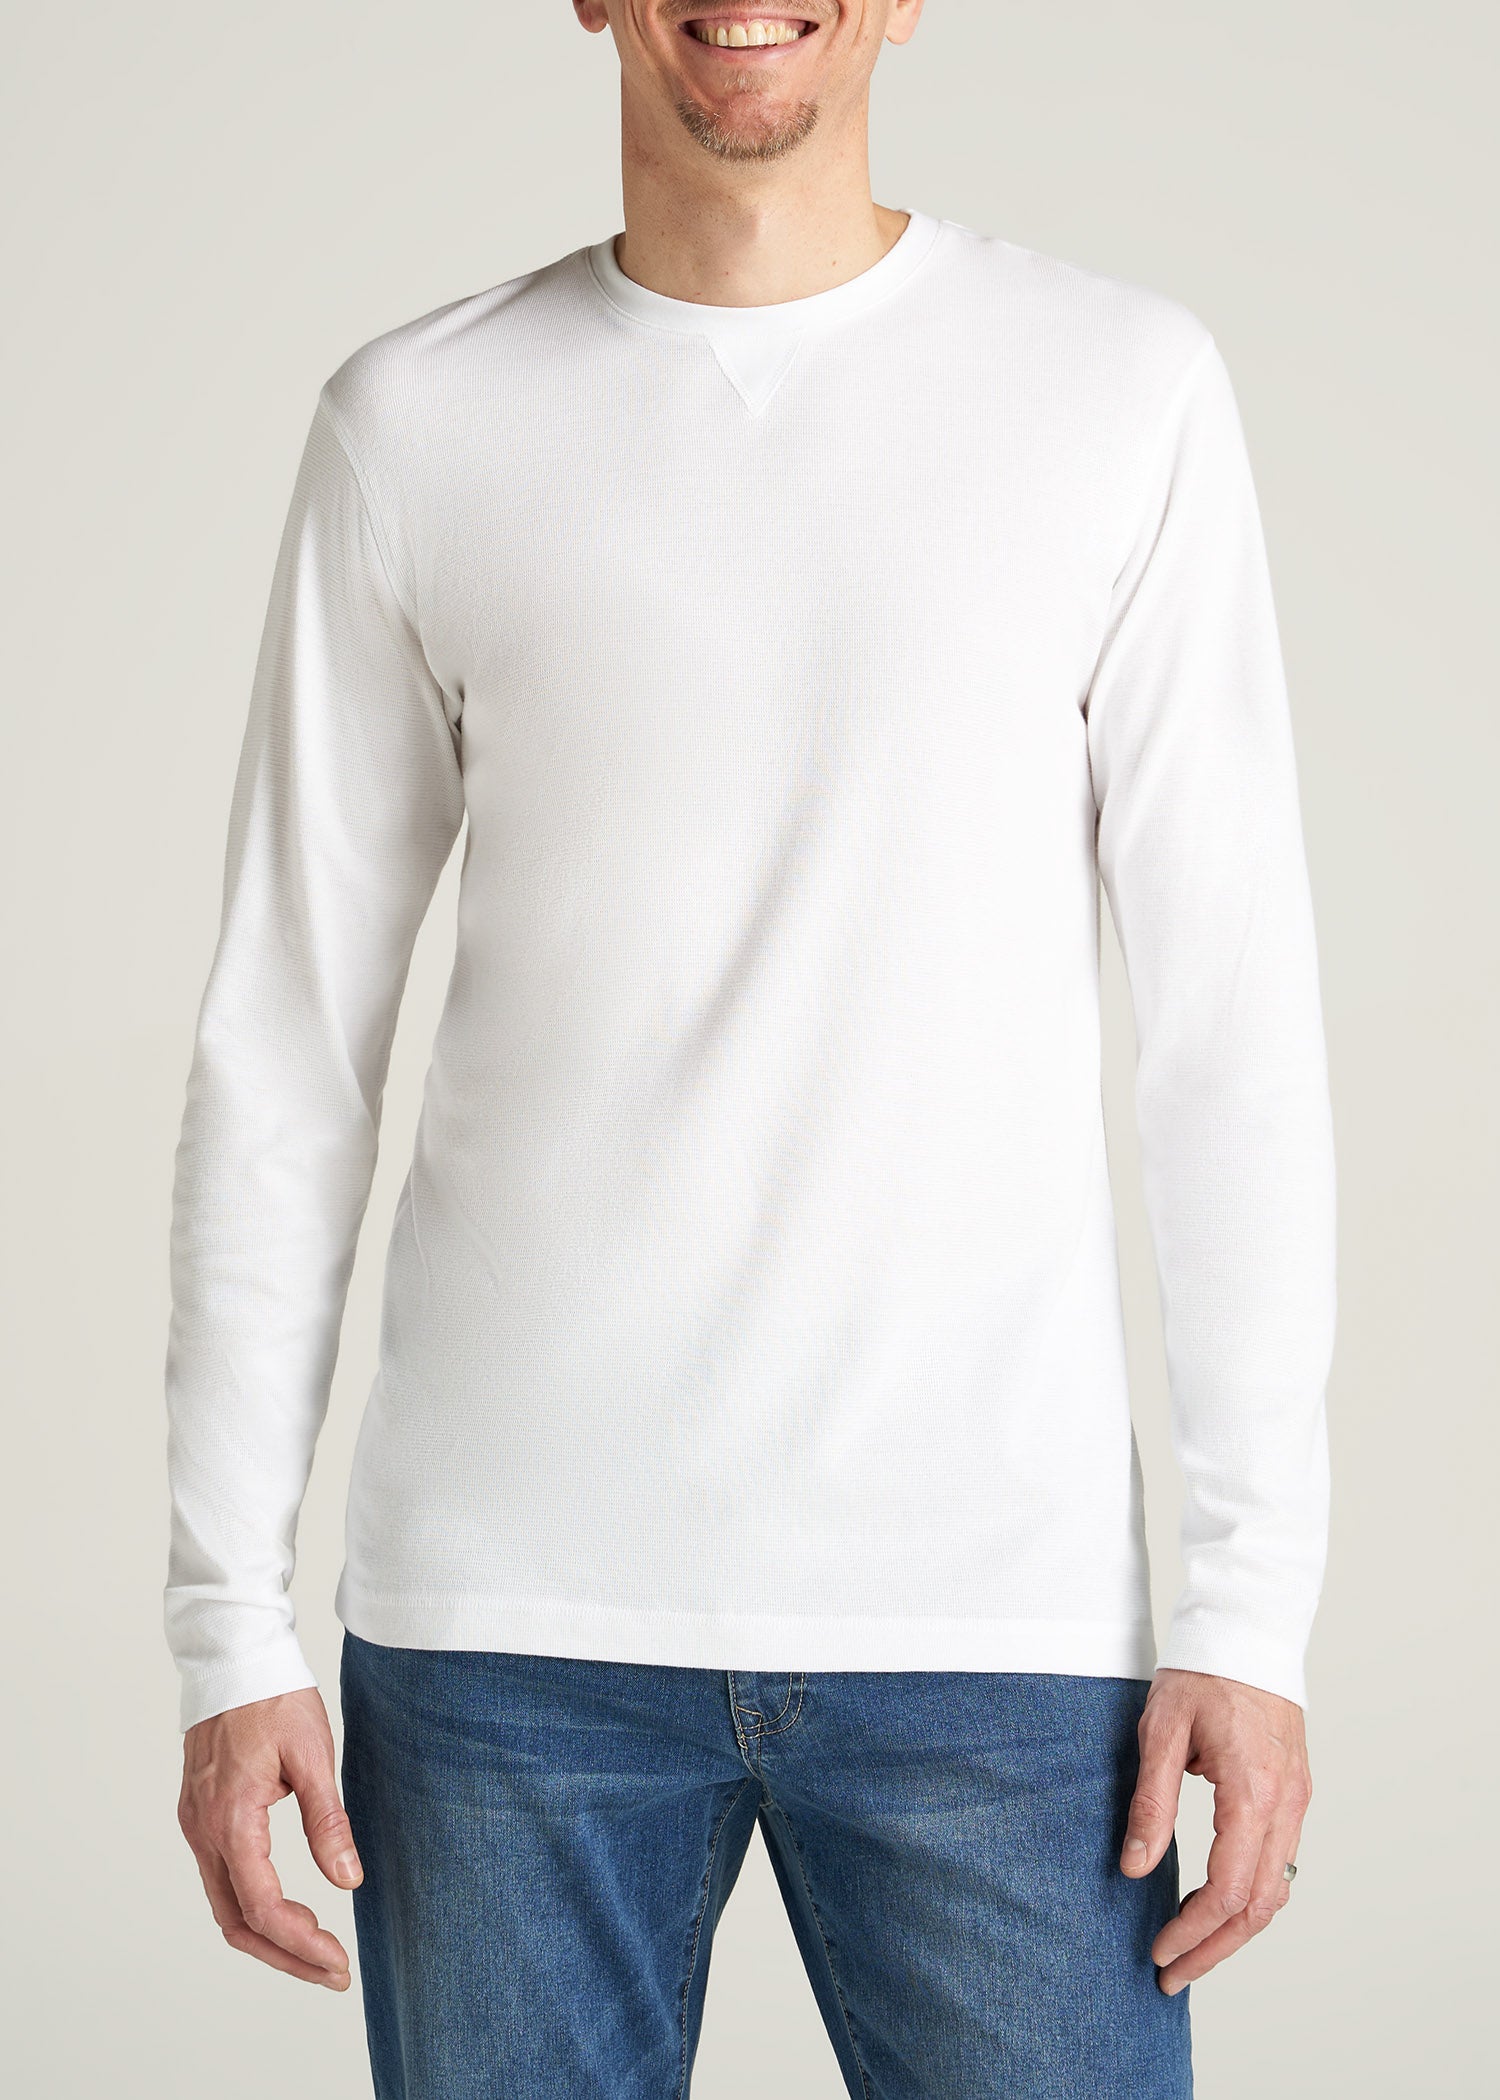 American Tall Fitted Ribbed Long Sleeve Tee